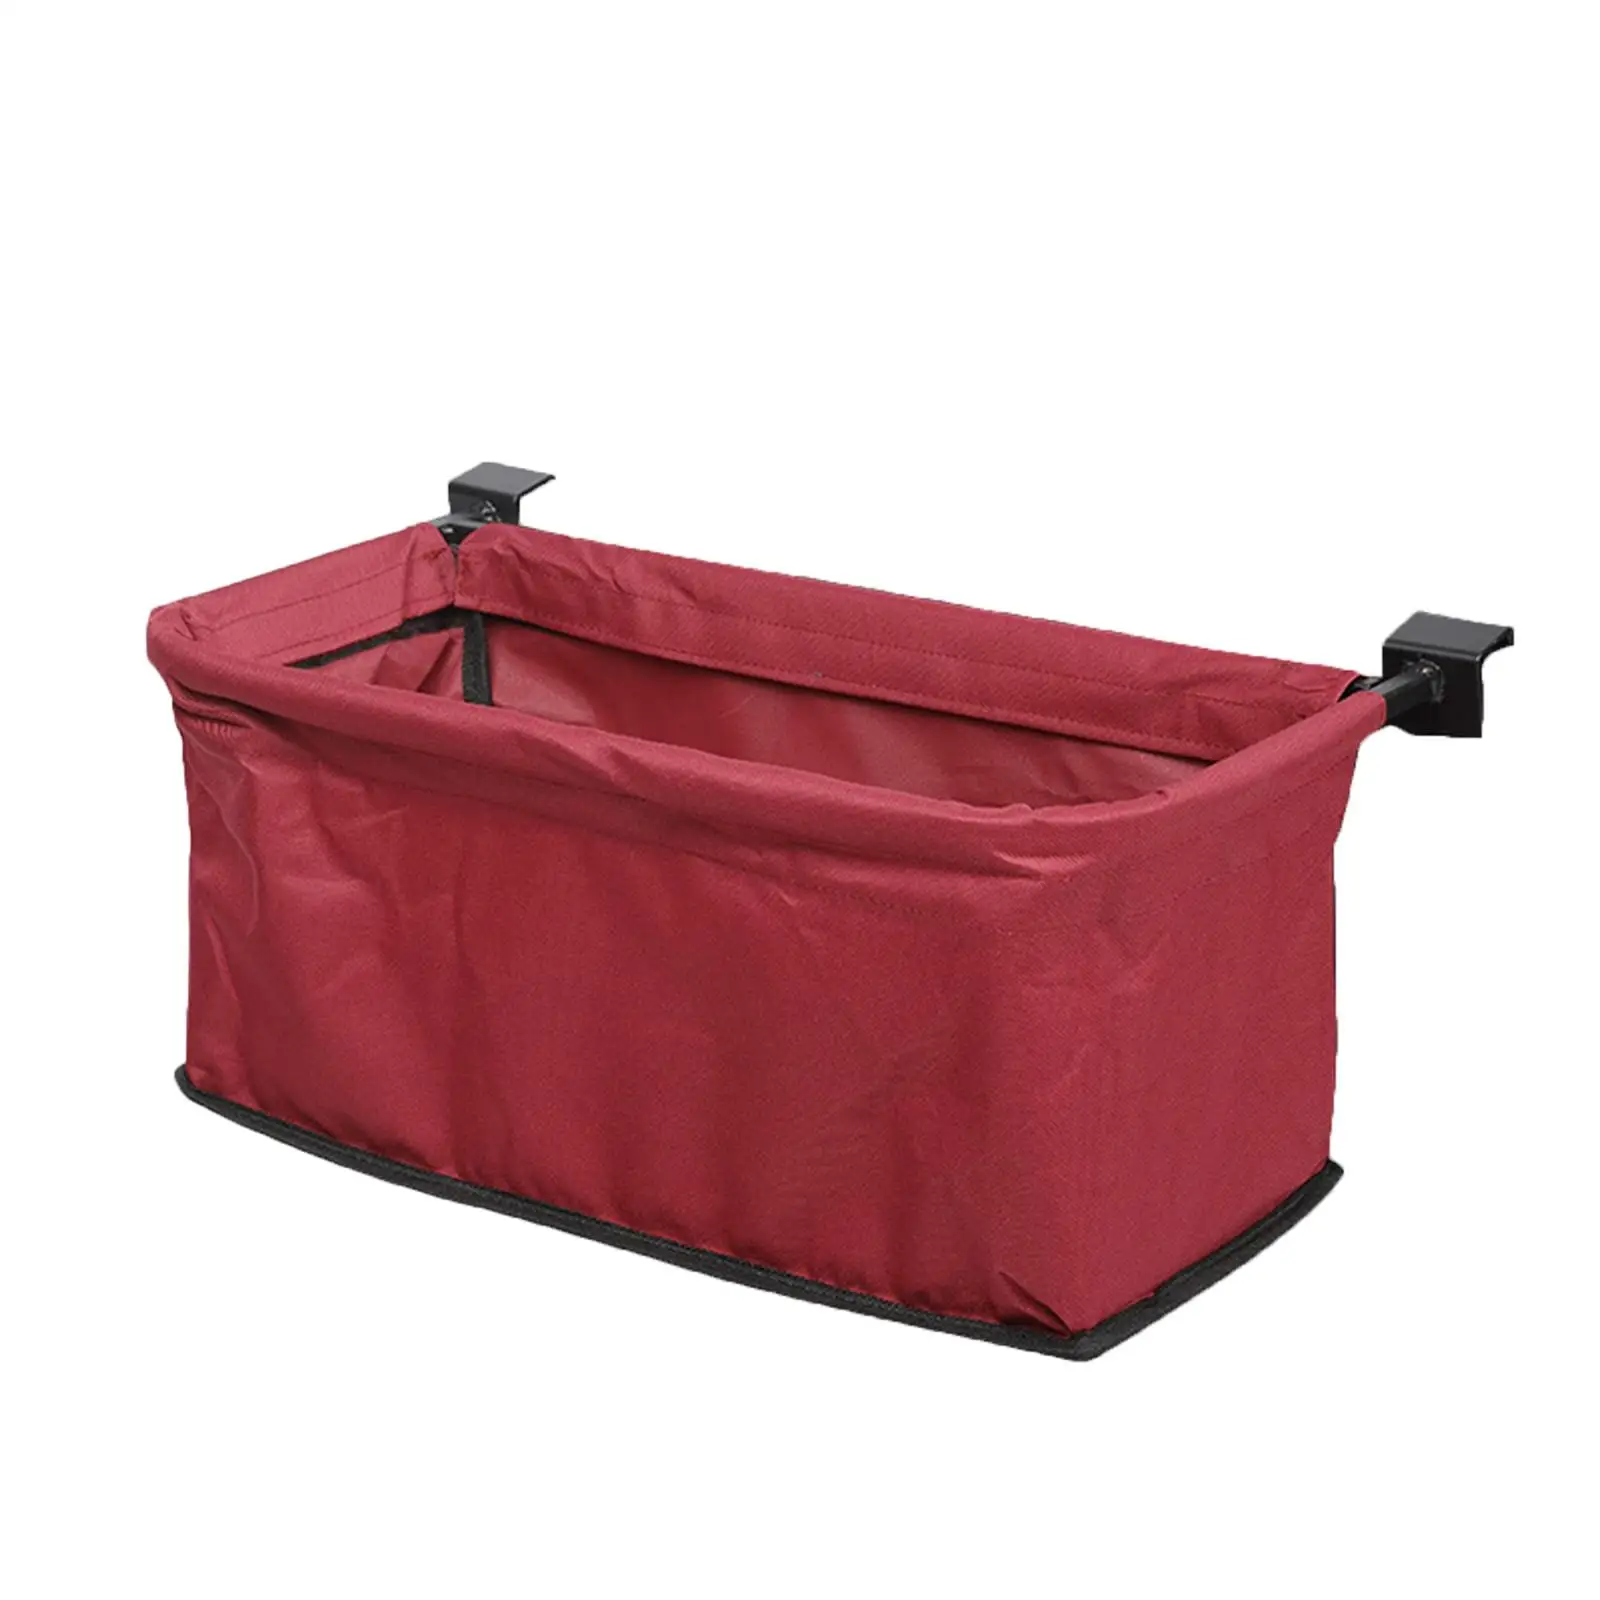 Utility Folding Cart Tail Bag Hand Push Pull Cart Basket Oxford Cloth Trolley Accessories for Garden Picnic